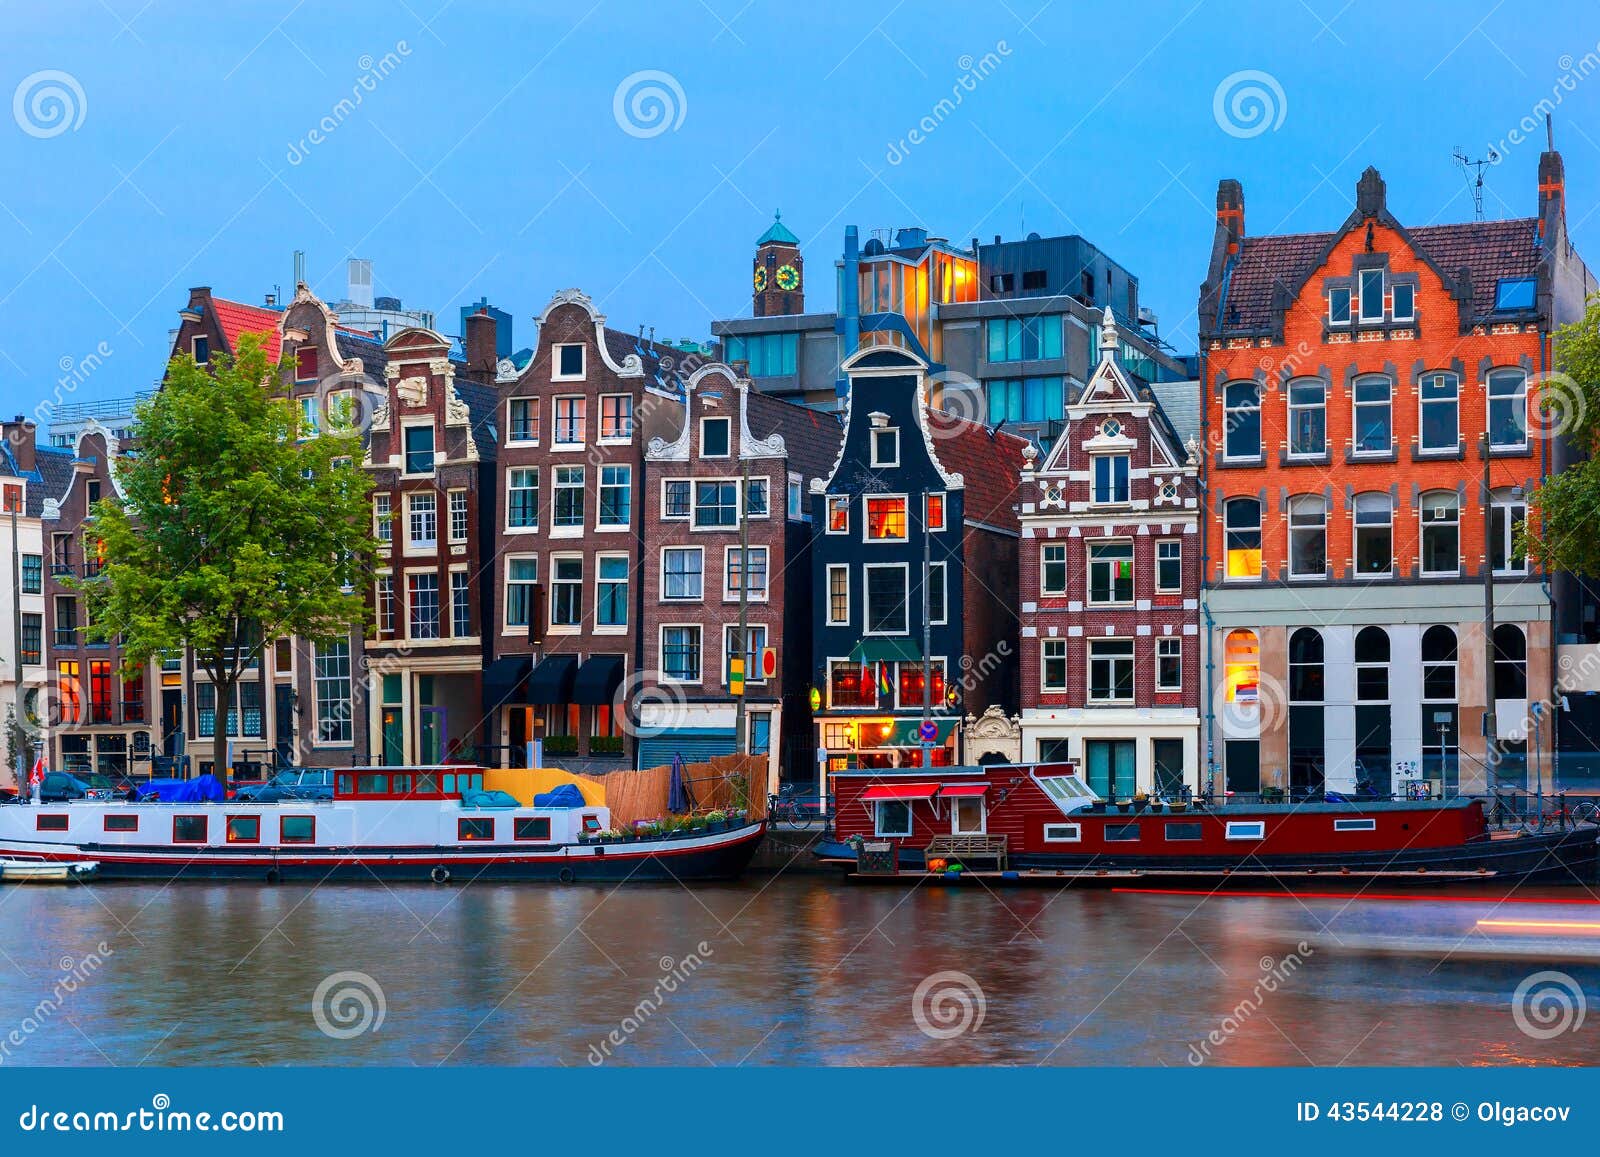 night city view of amsterdam canal with dutch houses